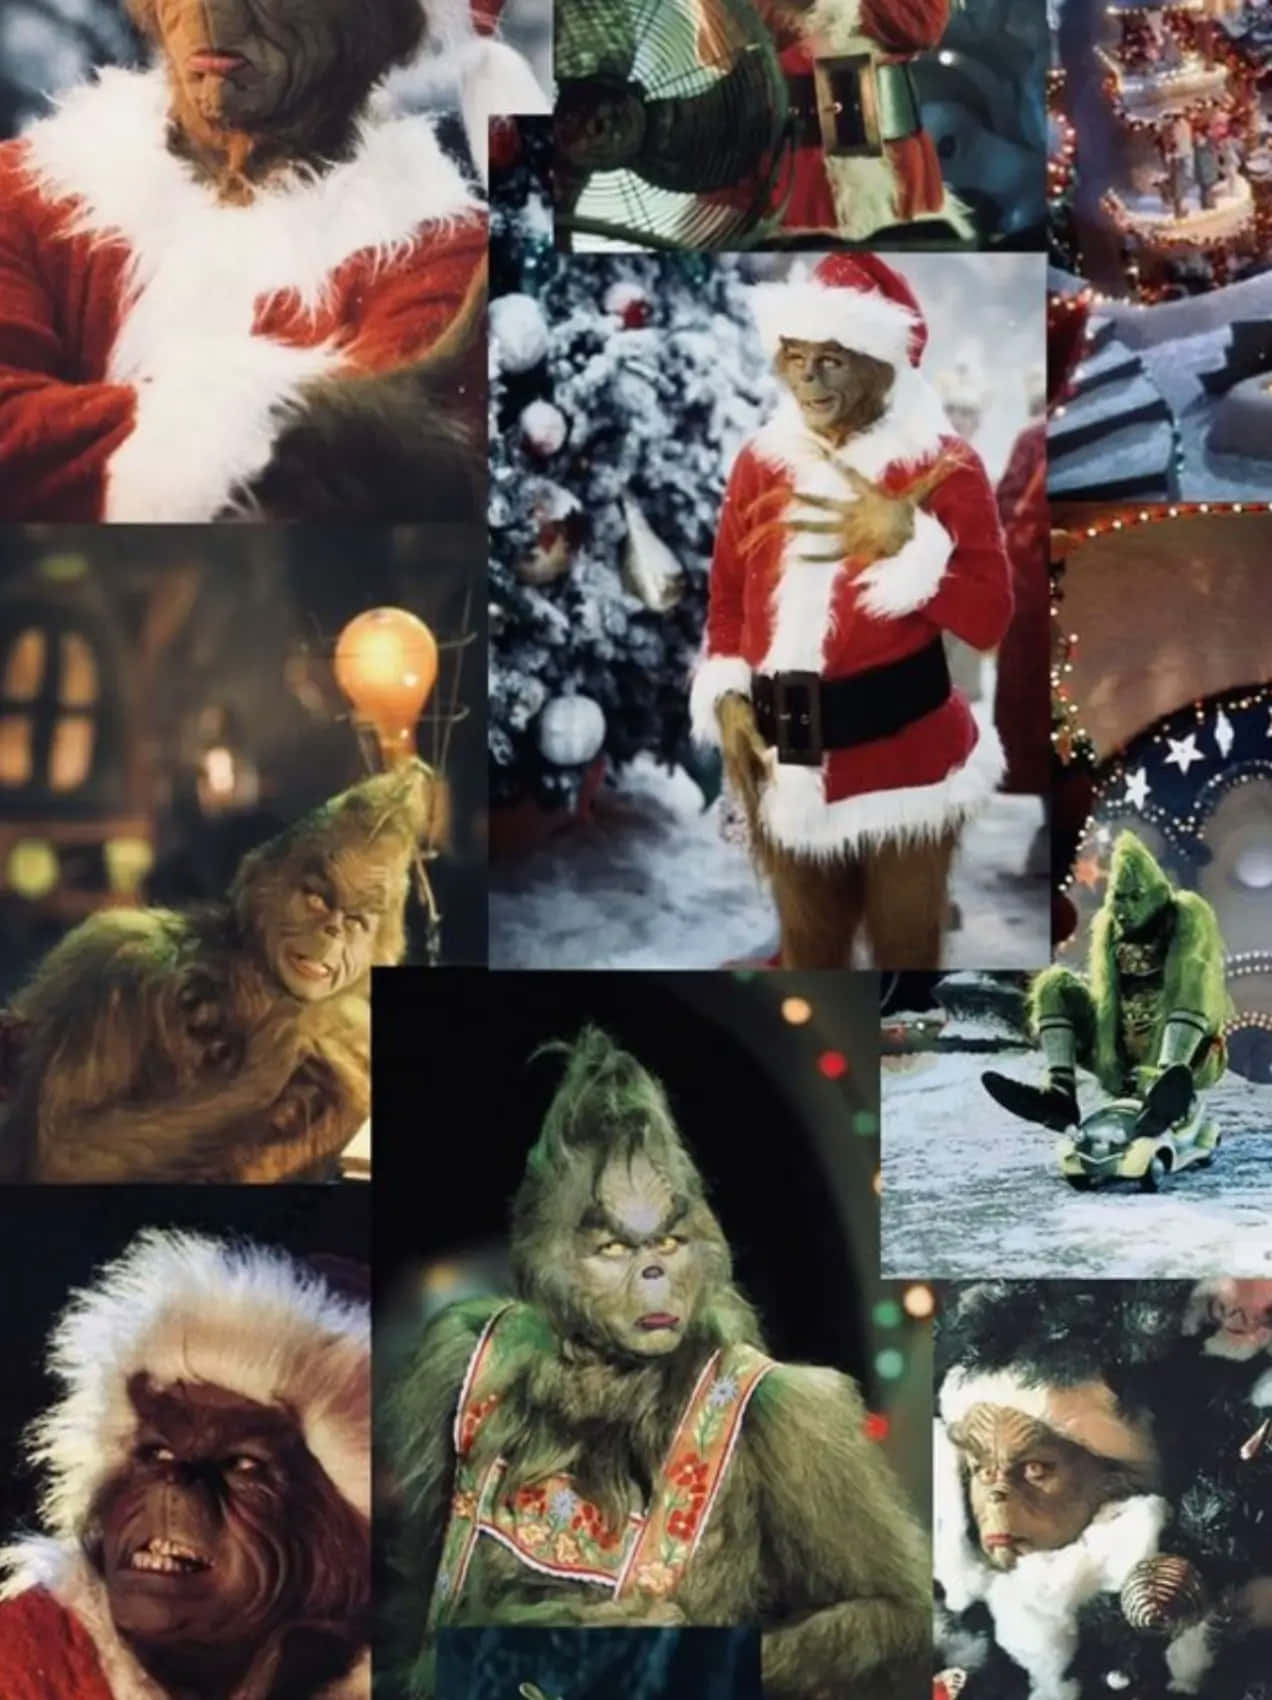 Grinch Collage Christmas Mood Wallpaper